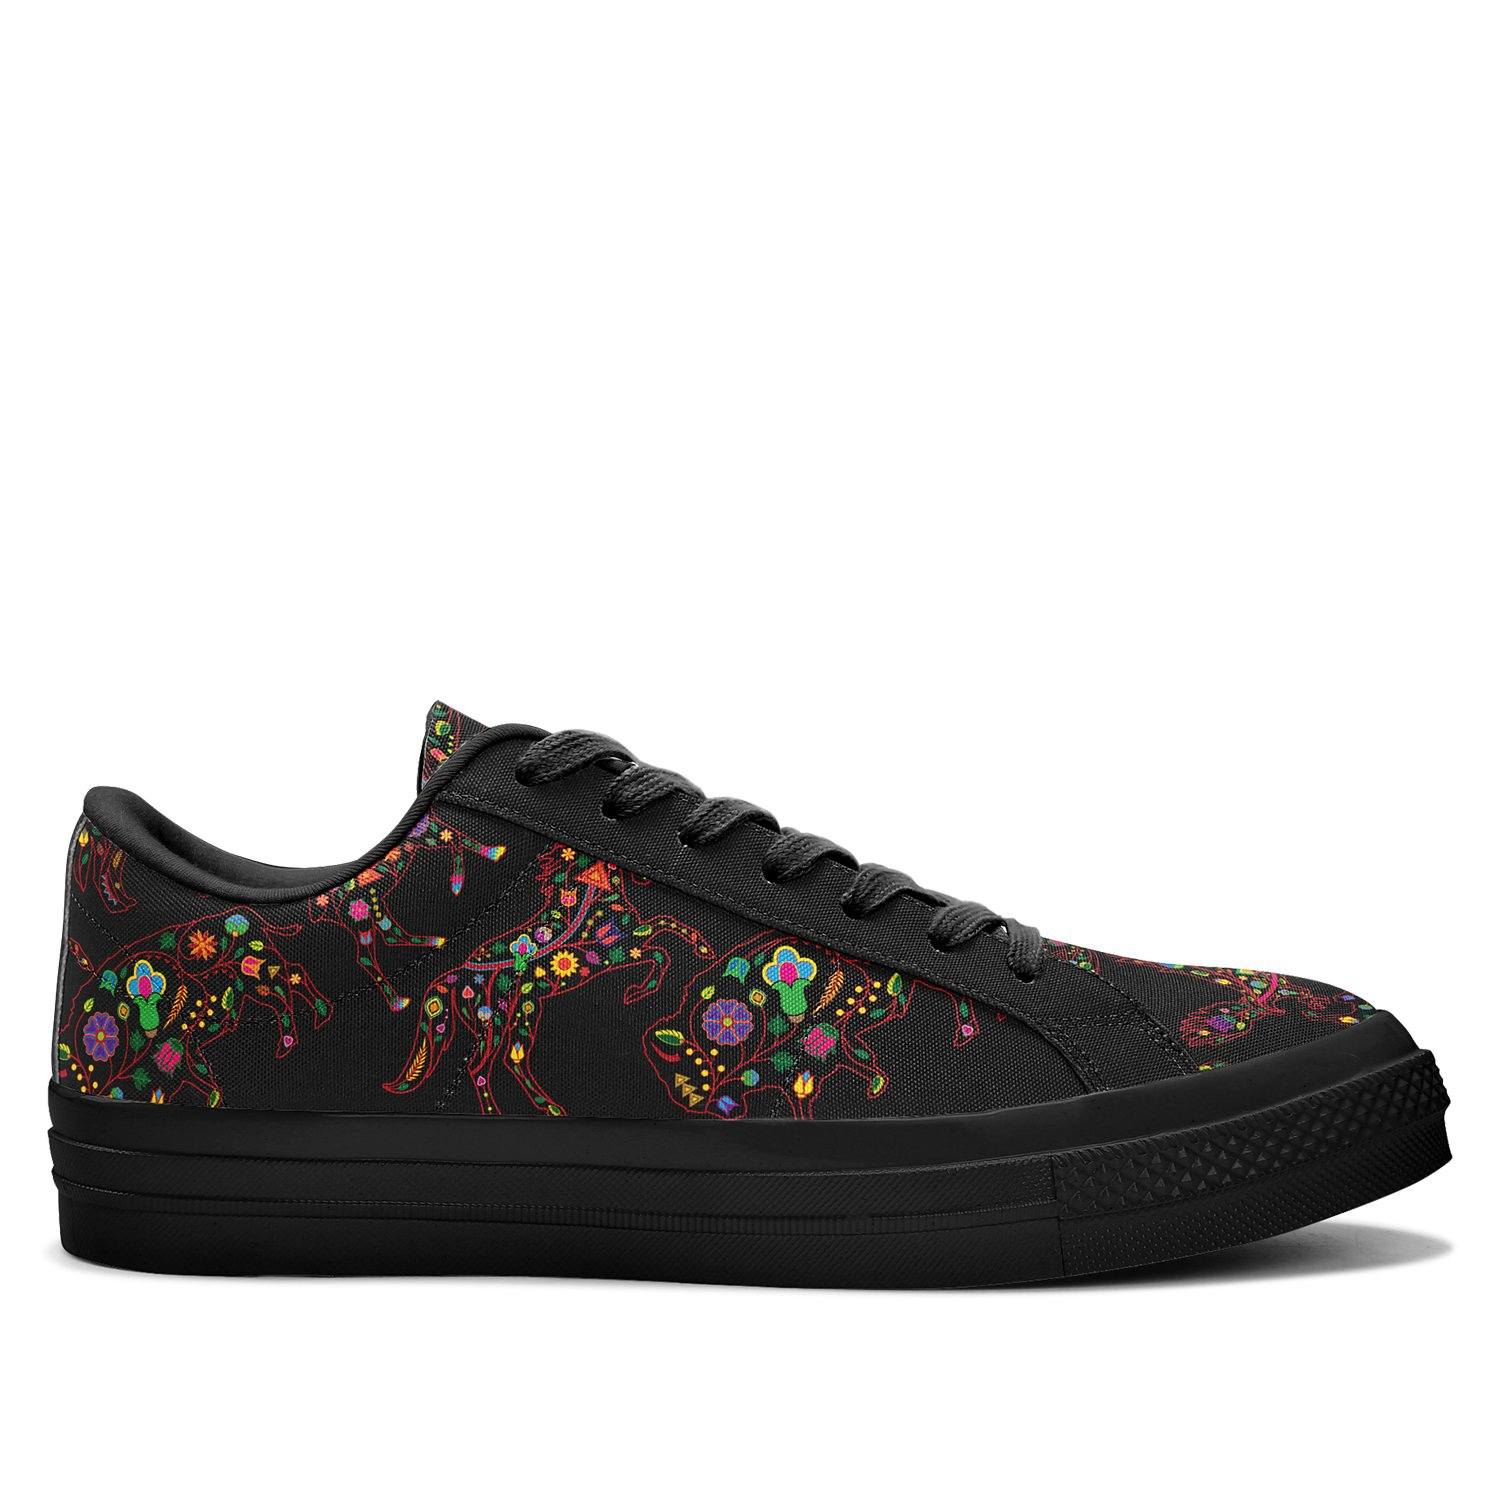 Floral Animals Aapisi Low Top Canvas Shoes Black Sole aapisi Herman 